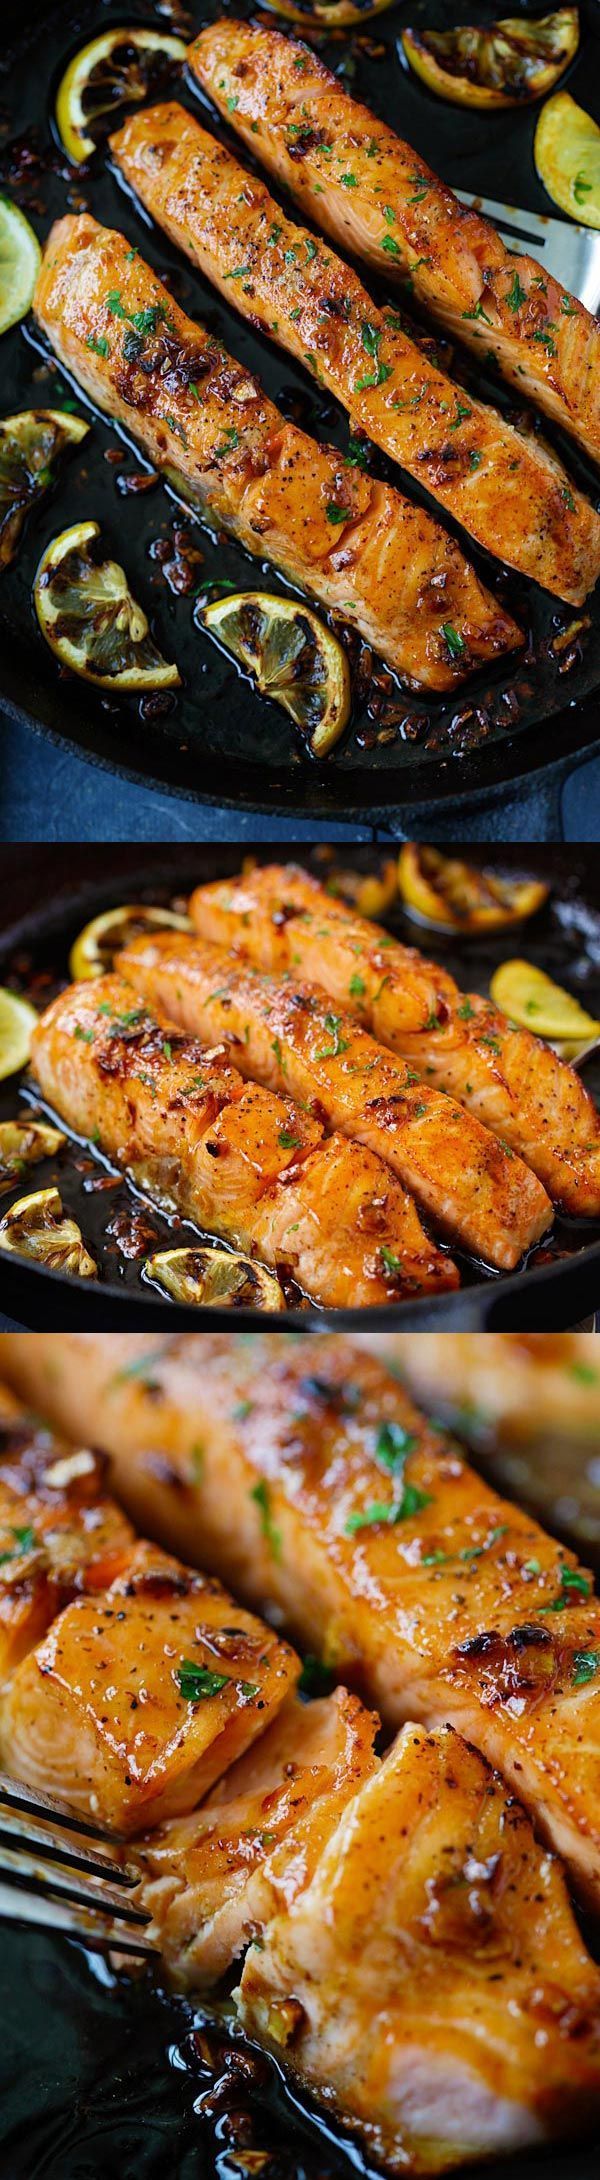 Honey Garlic Salmon – garlicky, sweet and sticky salmon with simple ingredients. Takes 20 mins, so good and great for